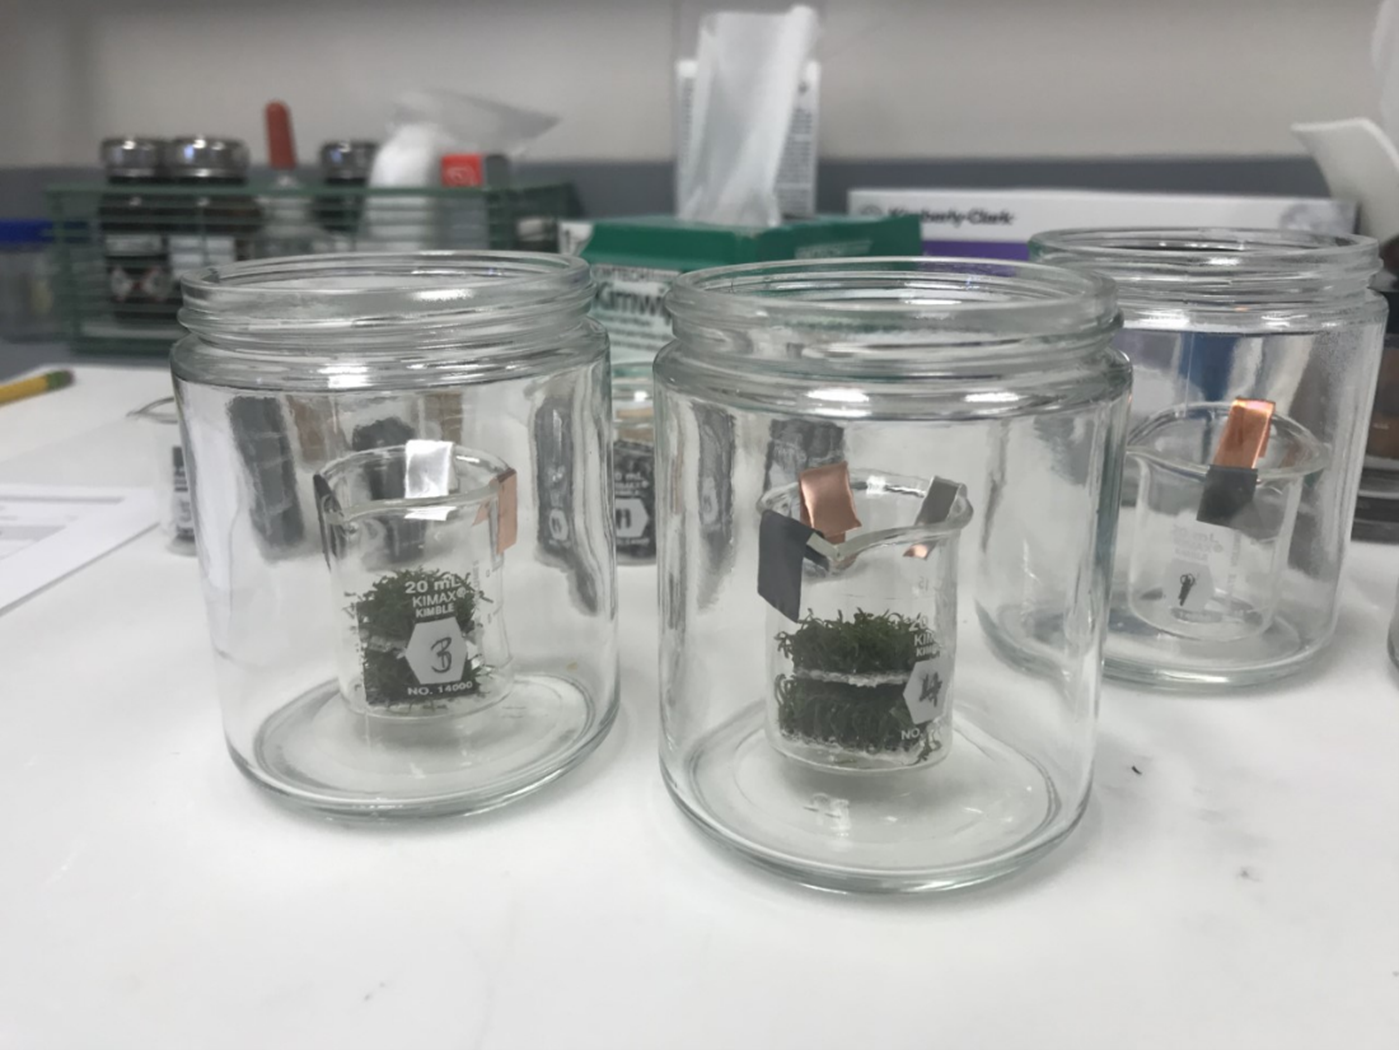 Photo of small beakers of shredded synthetic turf with folded pieces of metal, inside glass jars